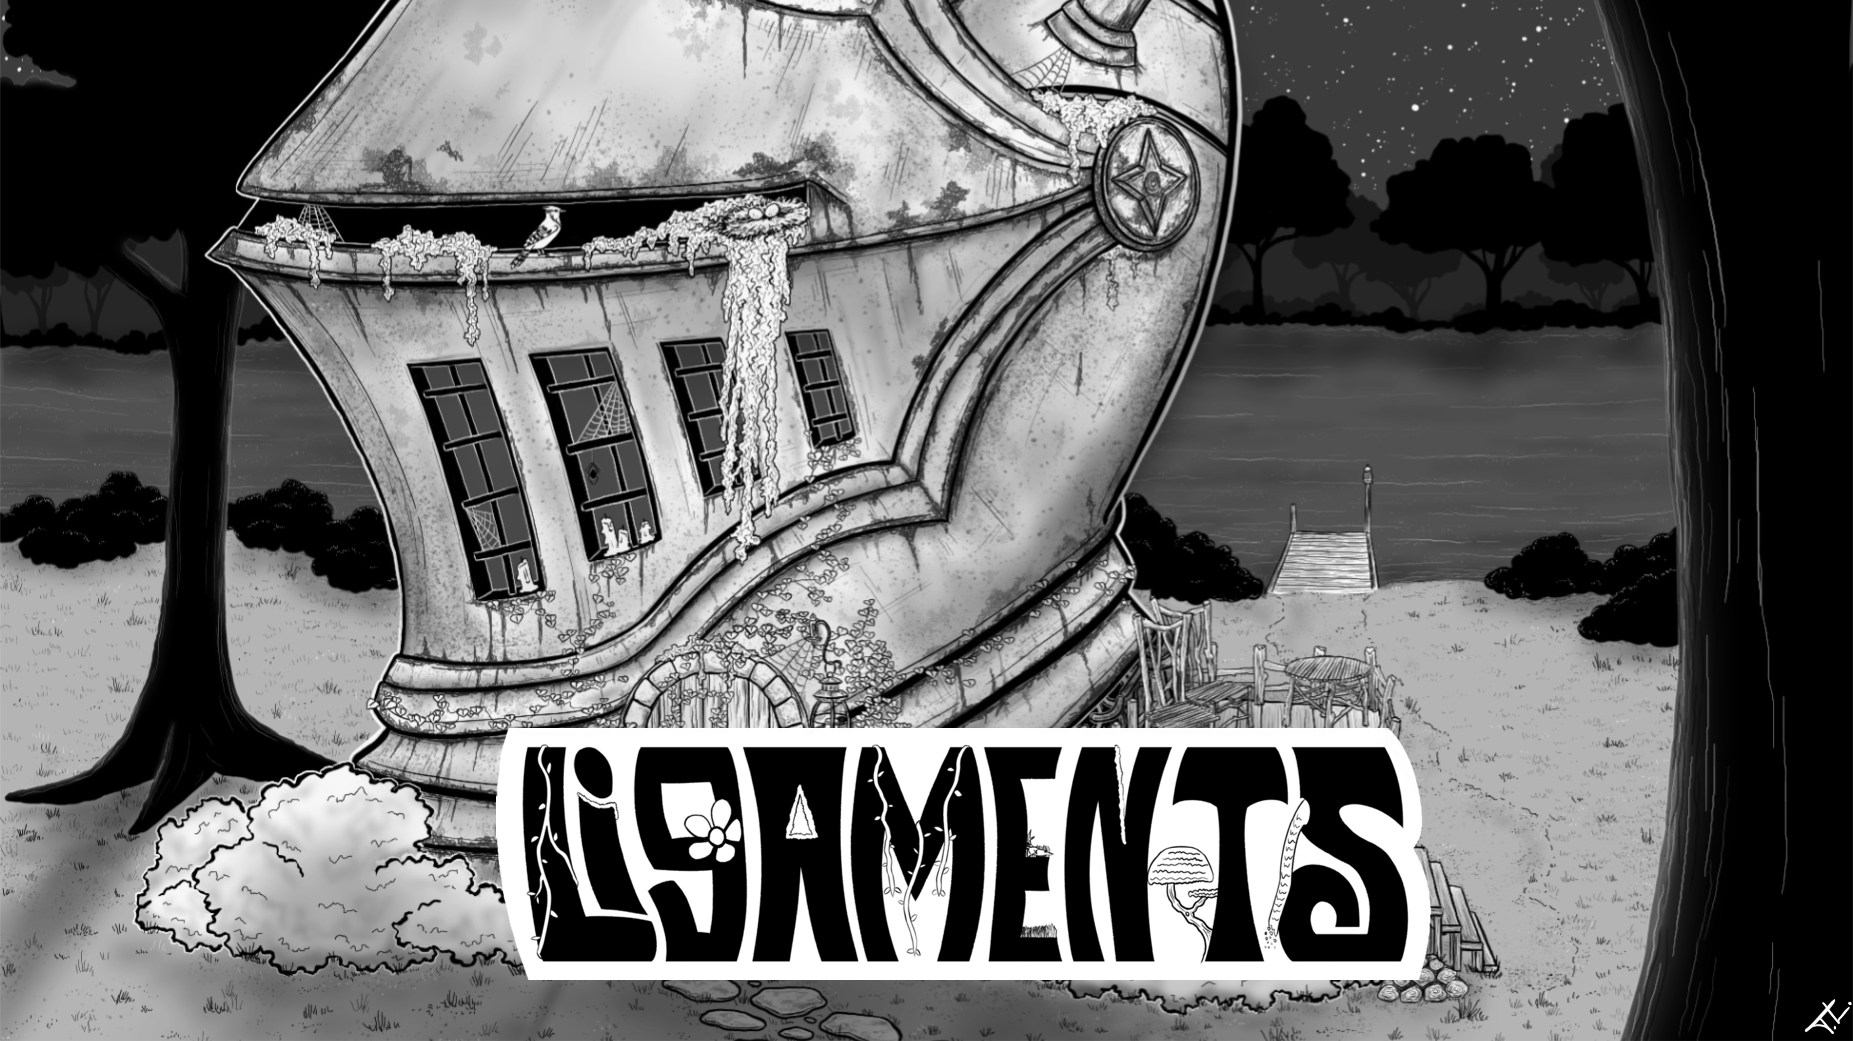 LIGAMENTS Launch! LIGAMENTS by Mike